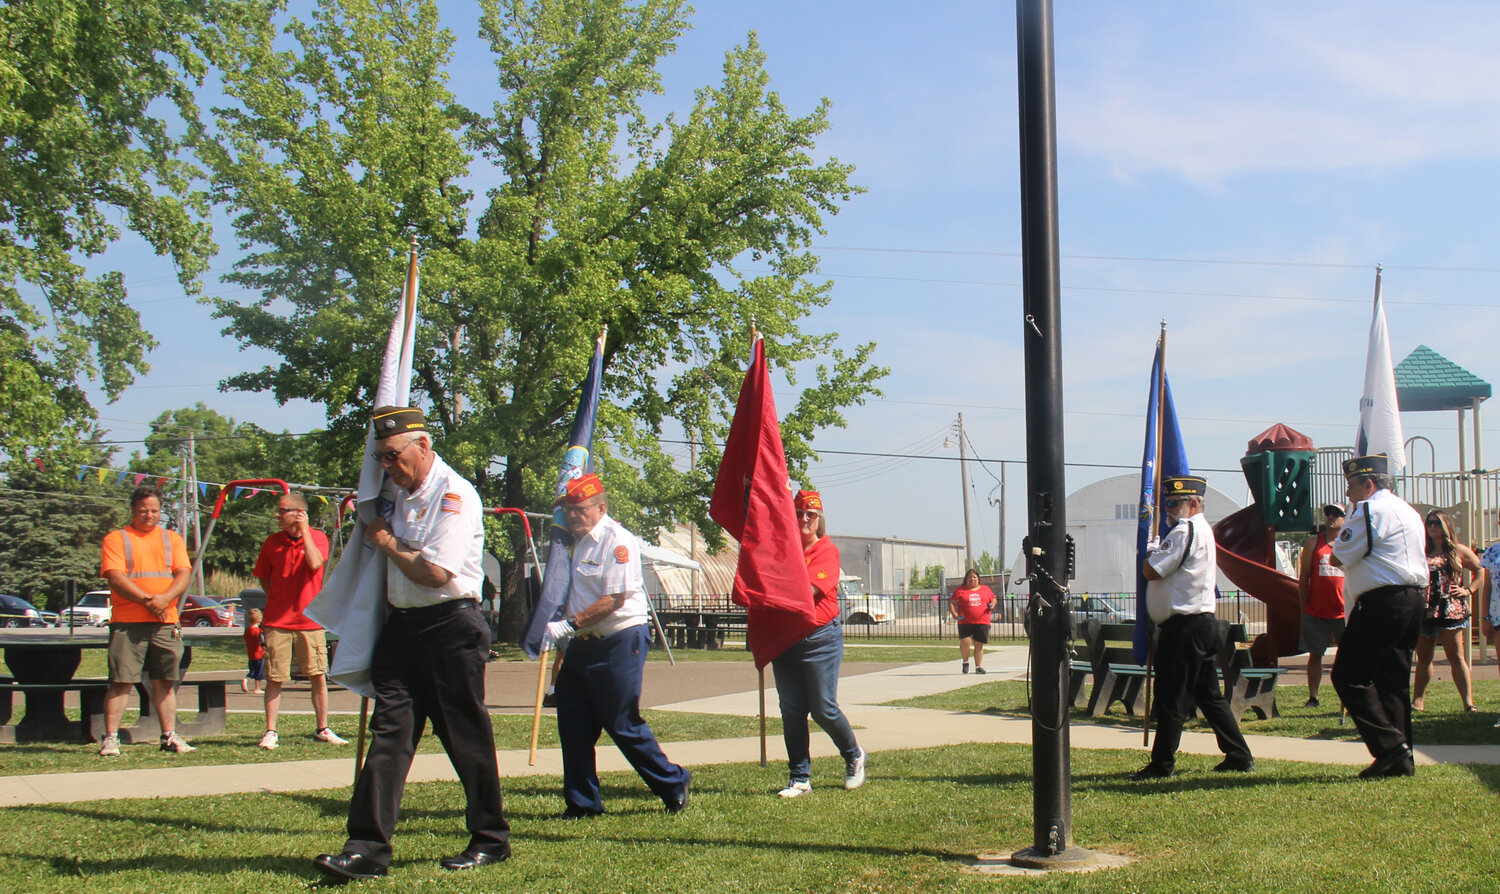 The Honor Guard carries the flags of the U.S. military branches during the Summerfest opening ceremonies.